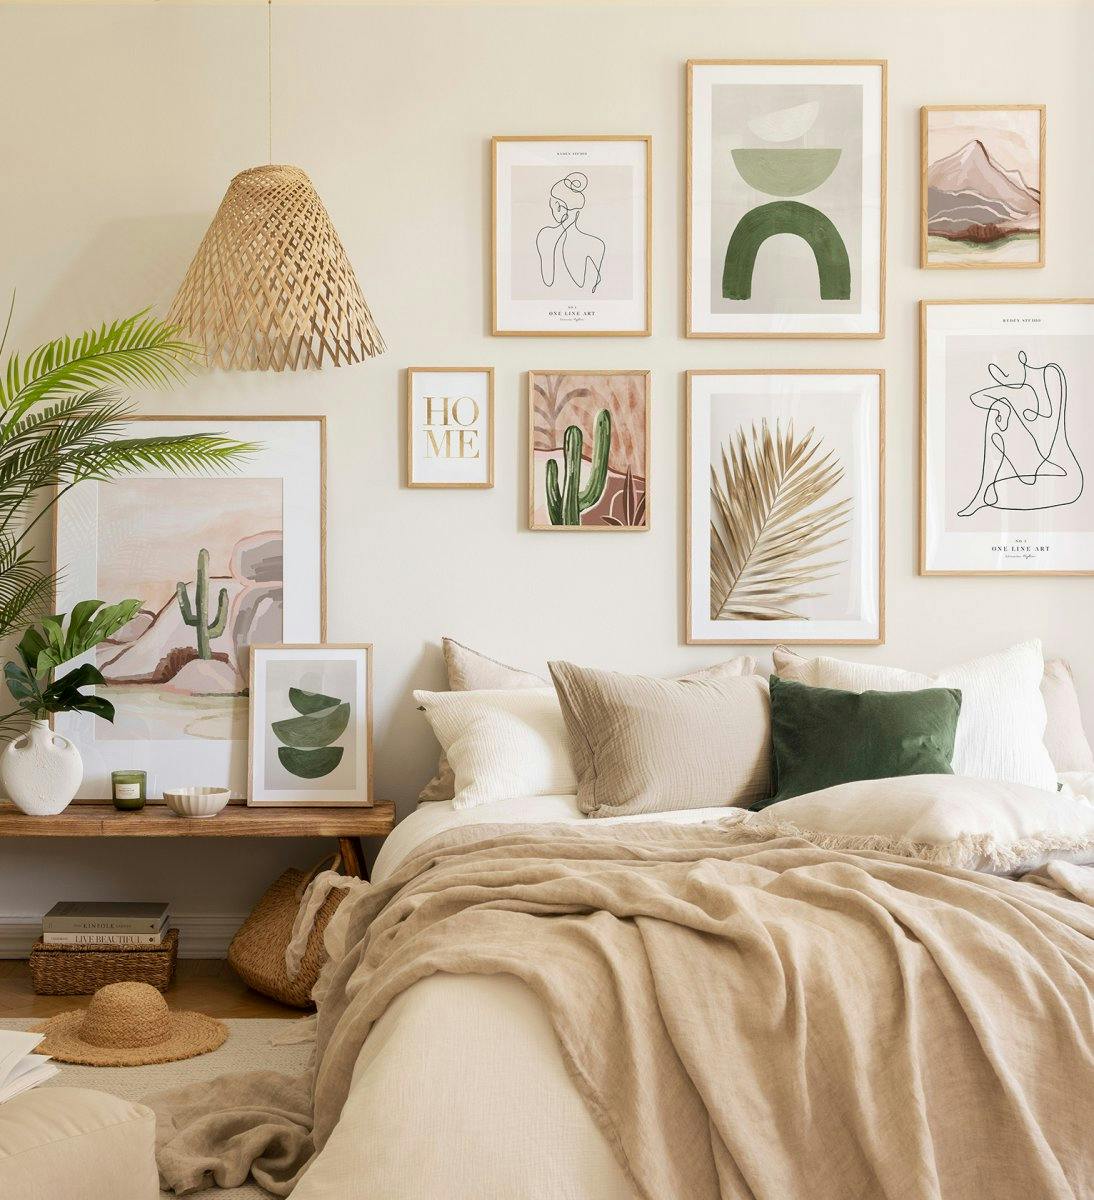 Oak-framed gallery wall featuring calm, summerly colors for the bedroom.